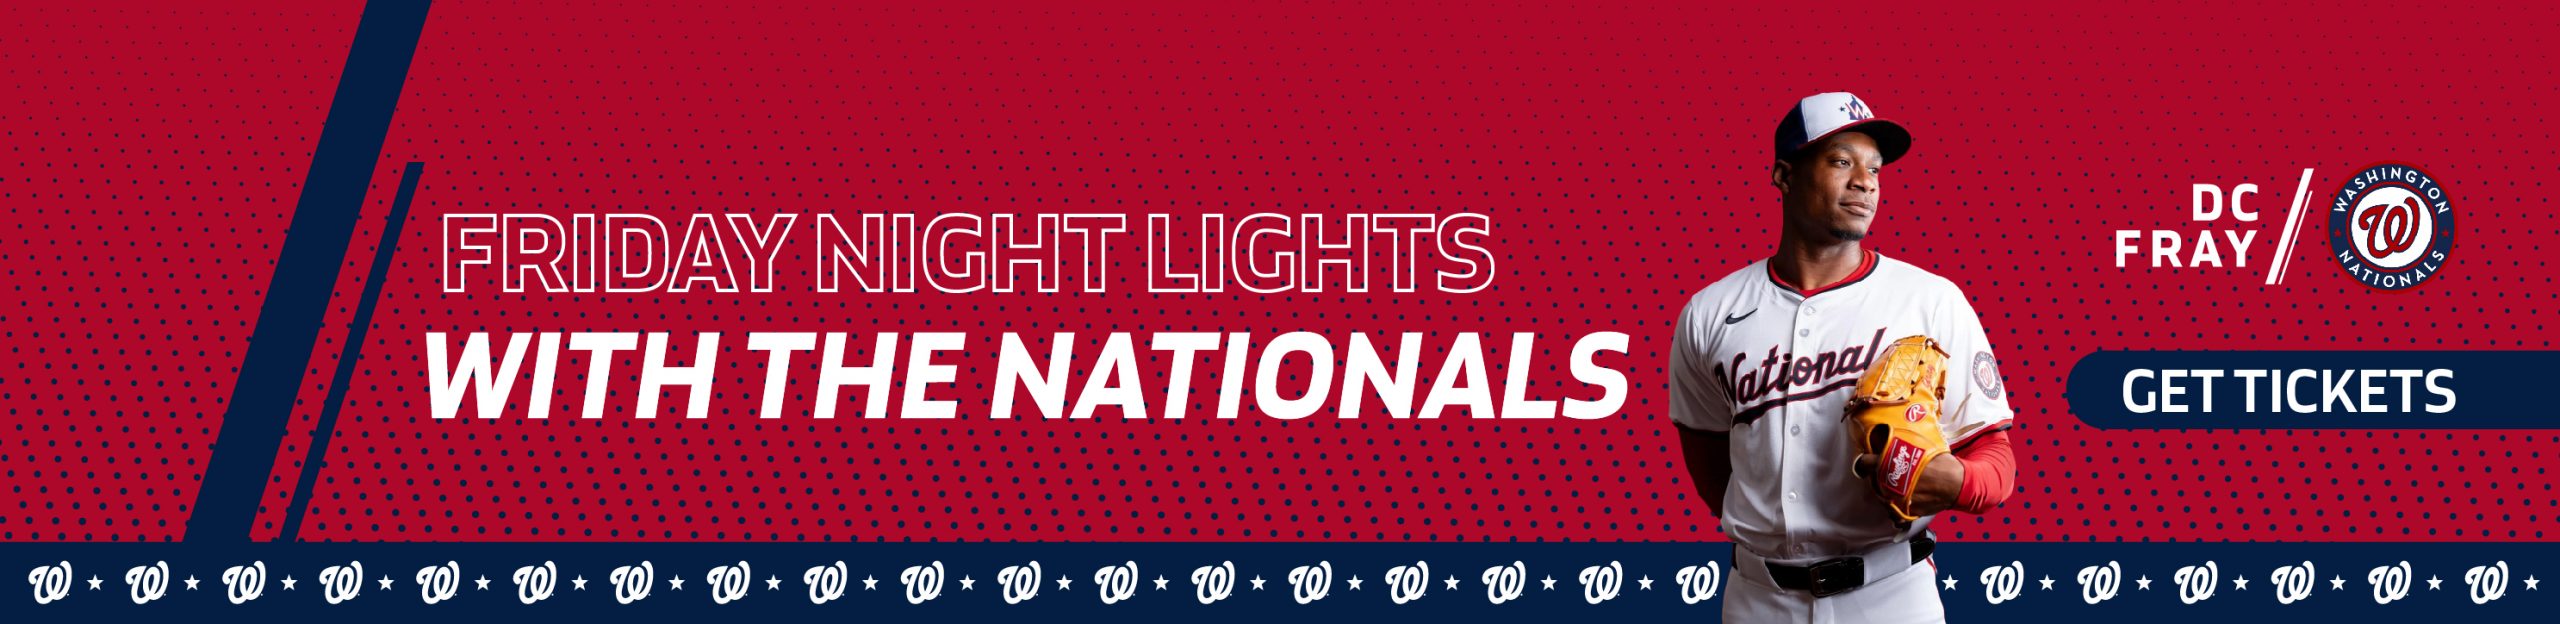 Friday Night Lights with the Nationals